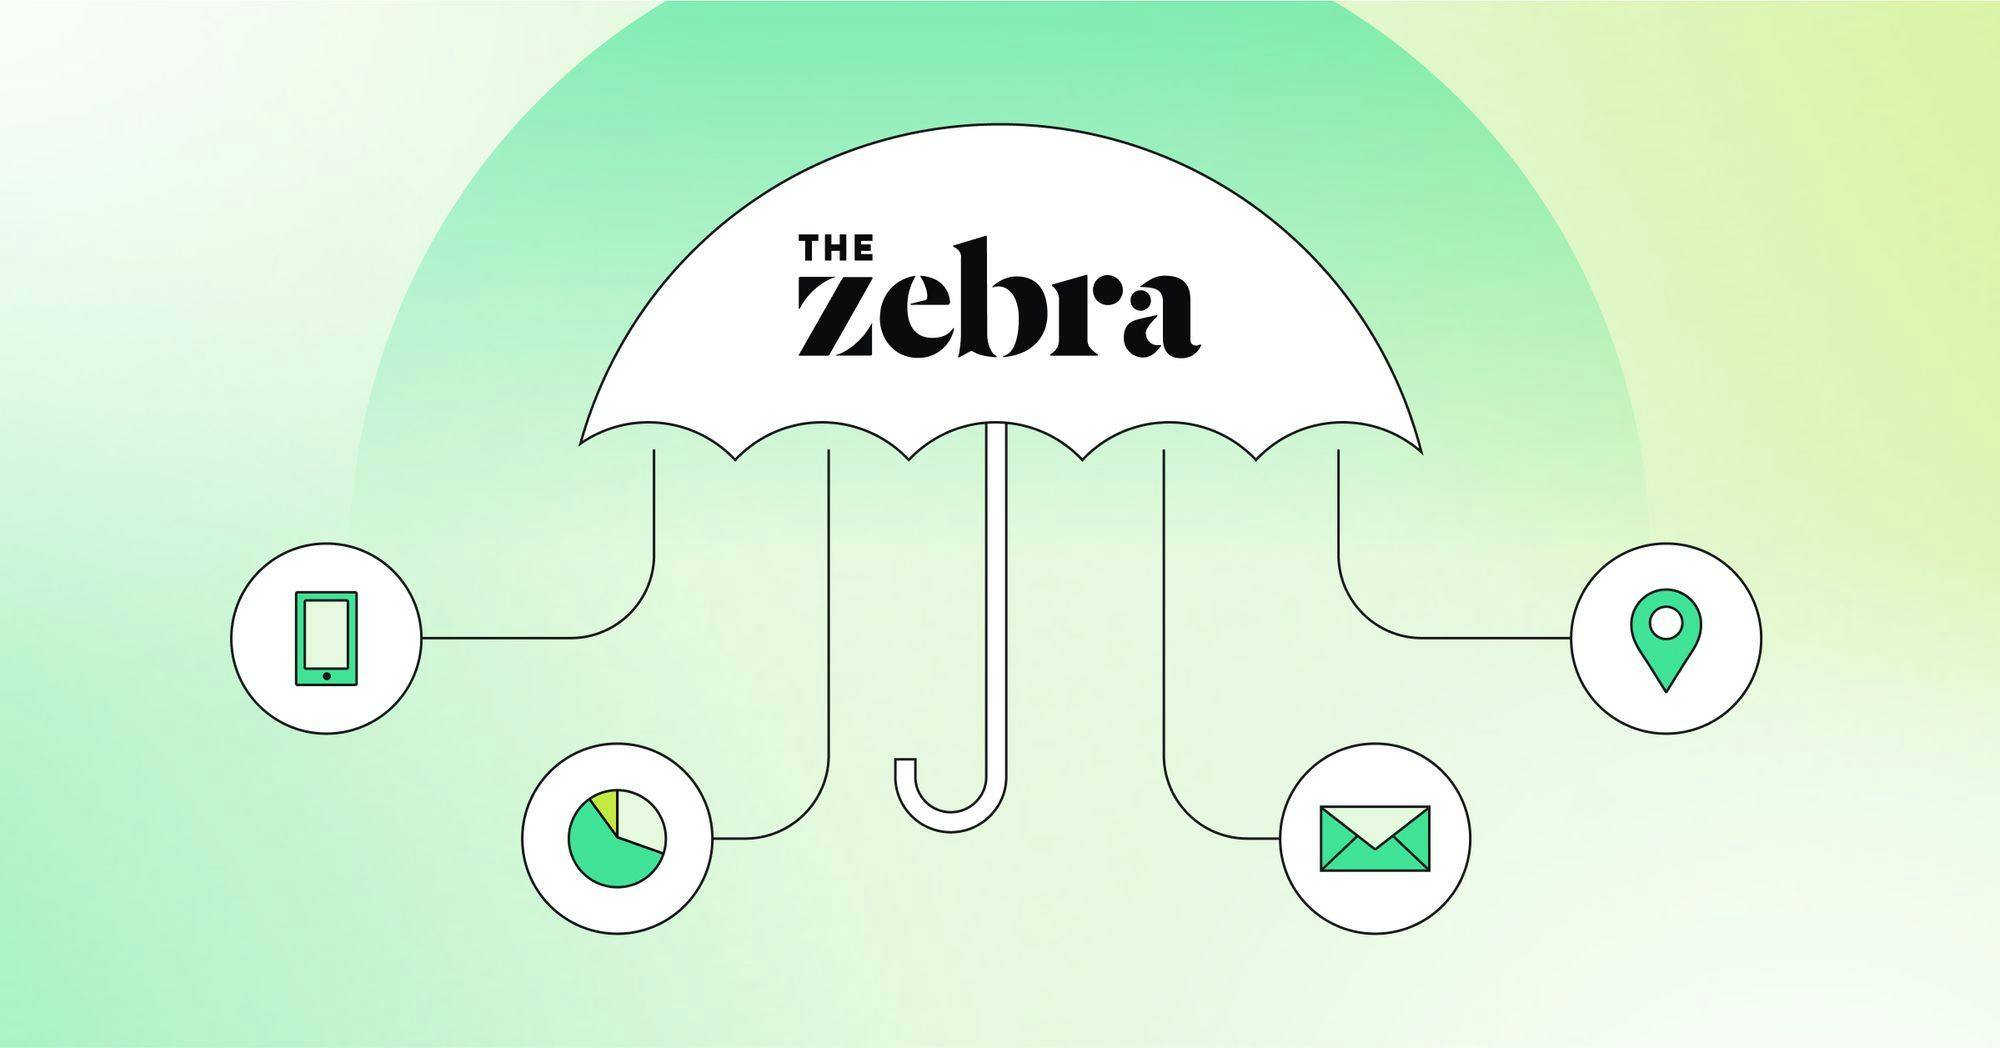 How The Zebra powers lifecycle marketing and advertising use cases.